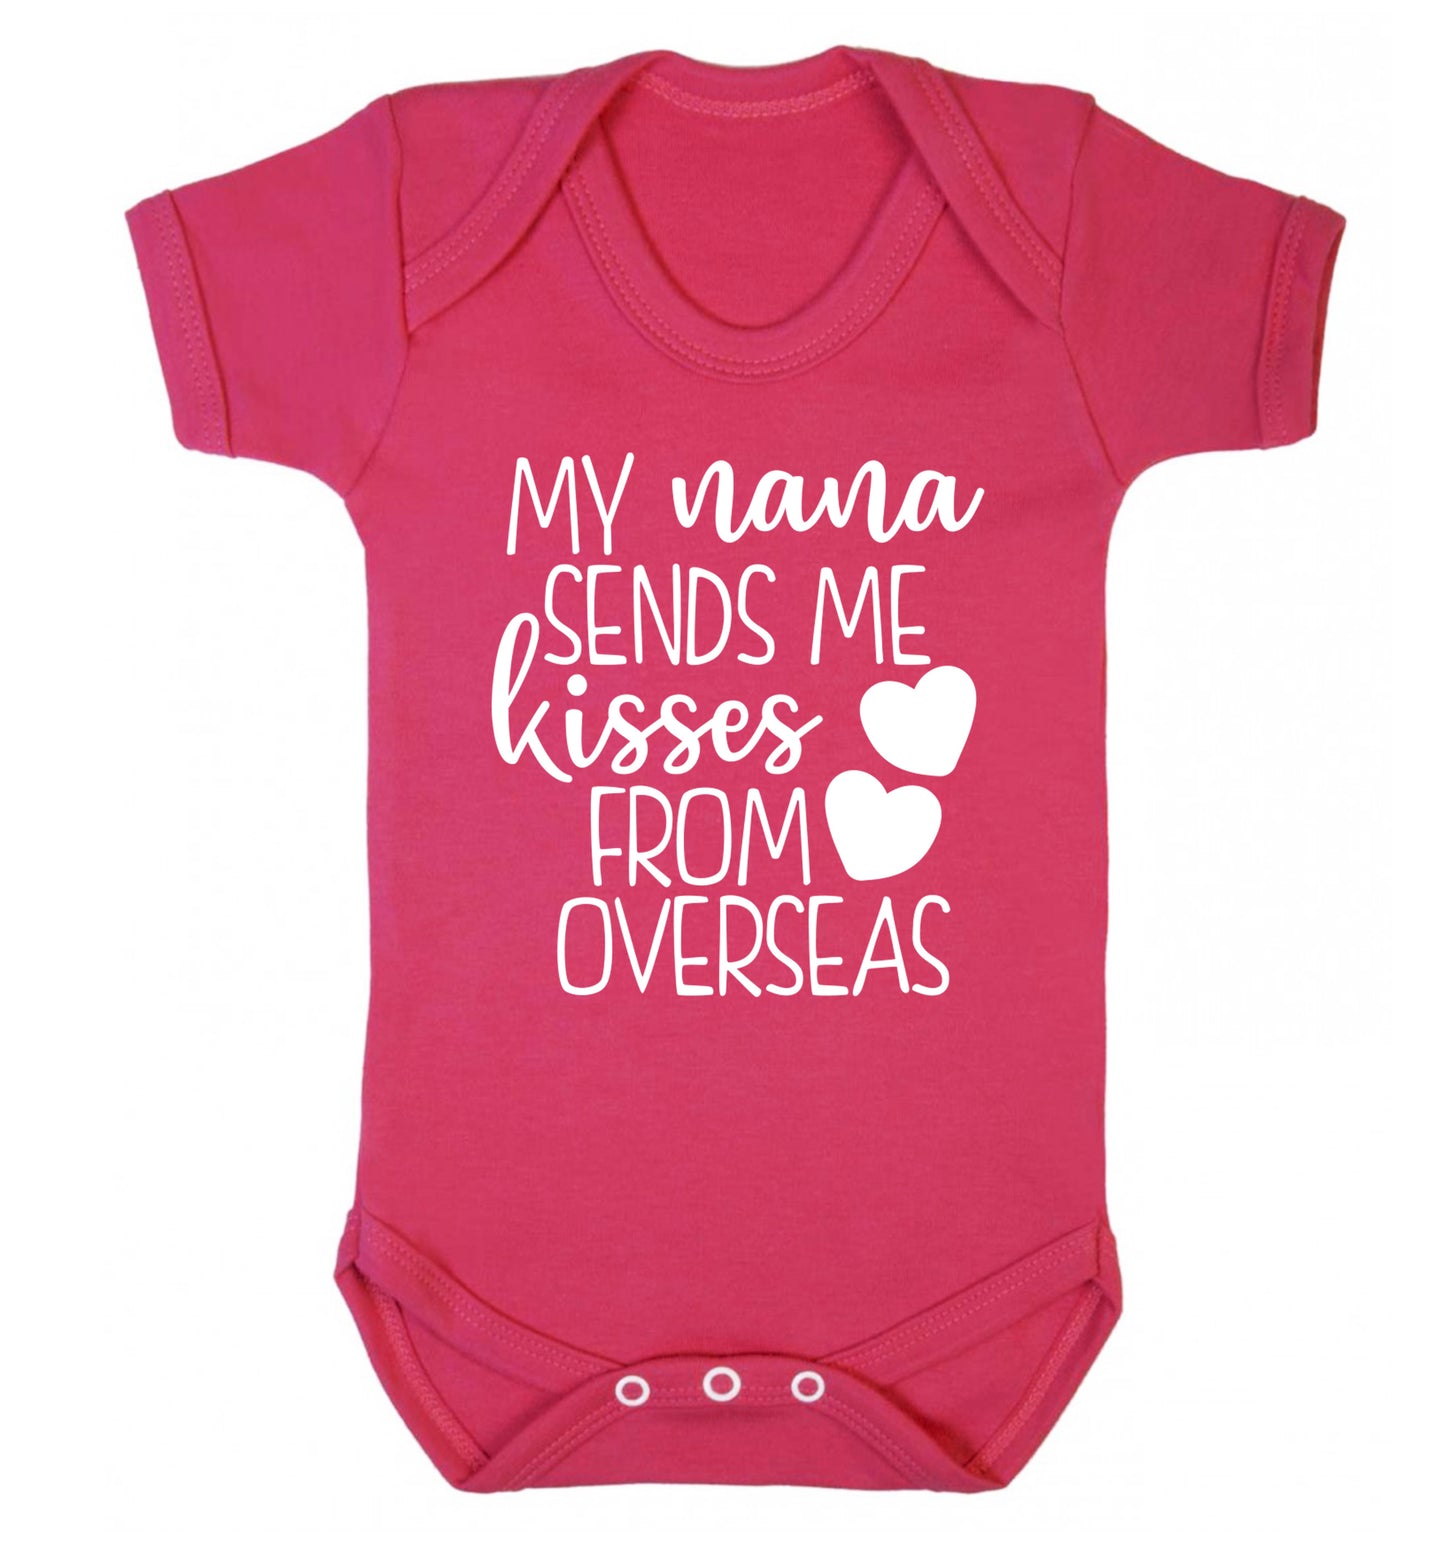 My nana sends me kisses from overseas Baby Vest dark pink 18-24 months